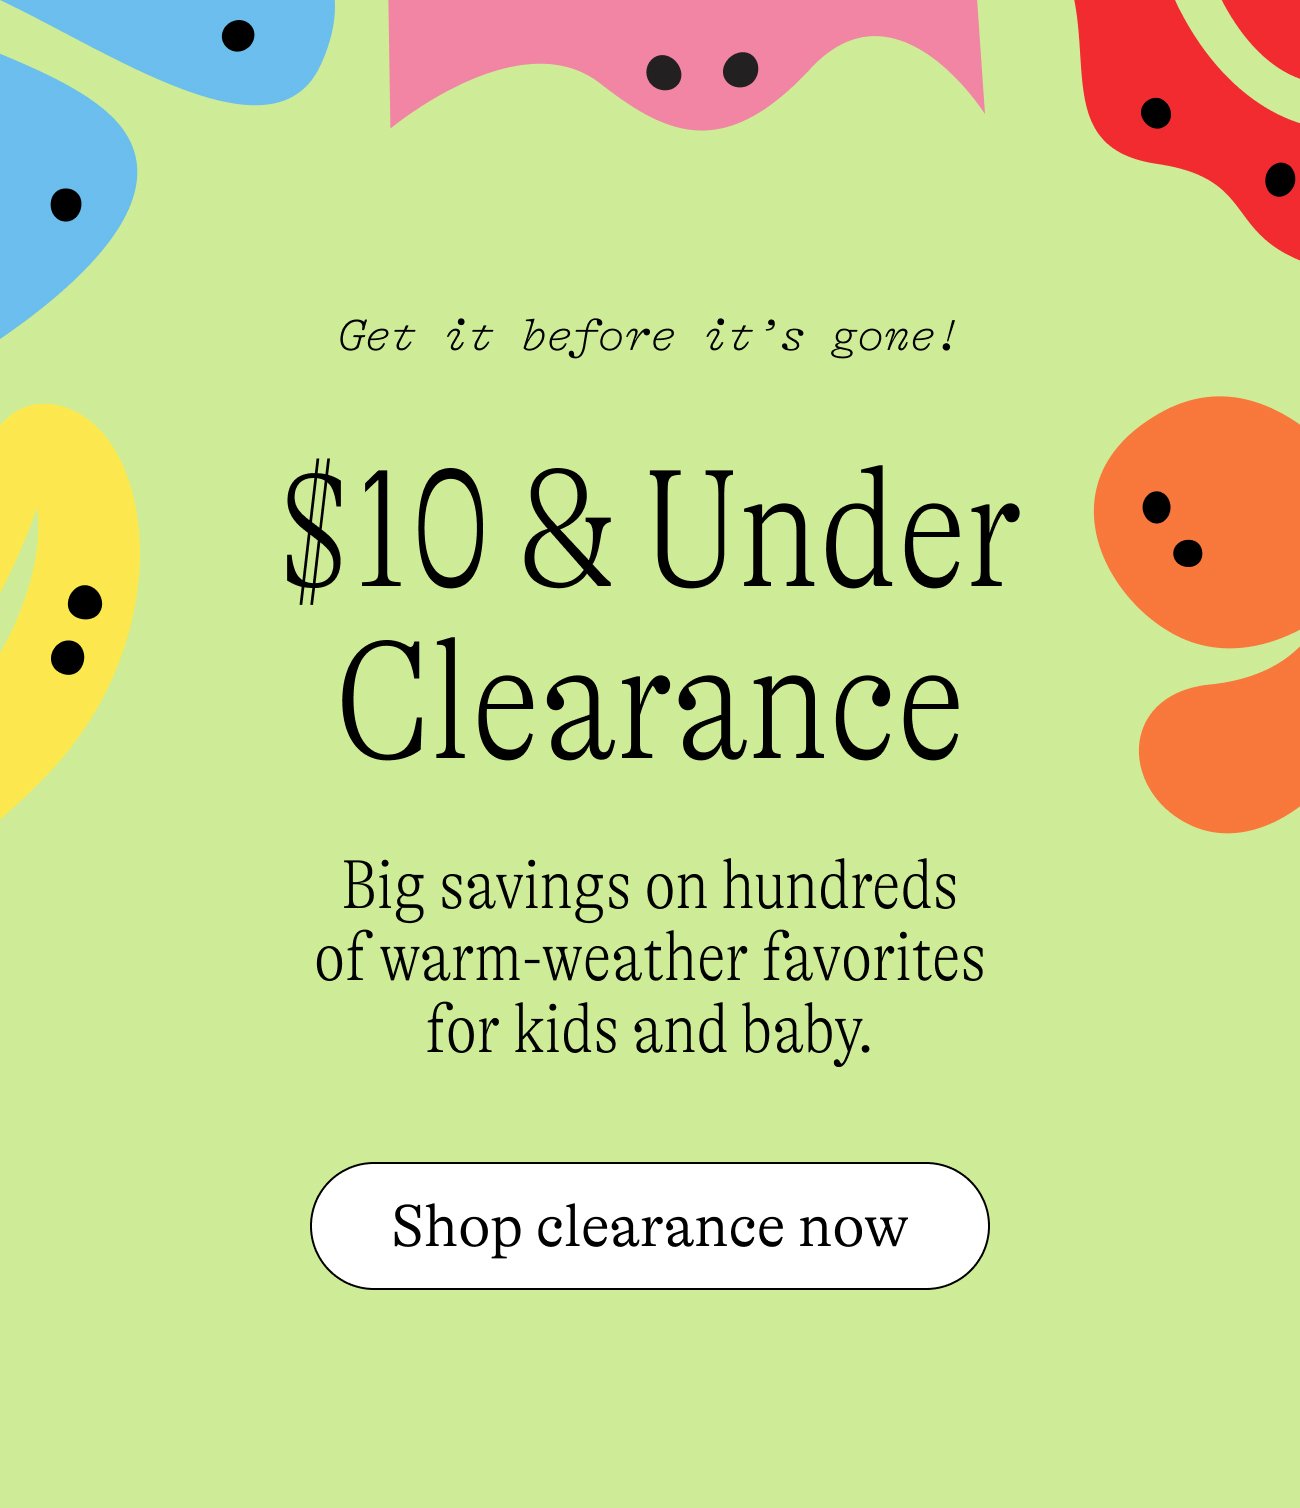 $10 & Under Clearance: Big savings on hundreds of warm-weather favorites for kids and baby. Shop clearance now.